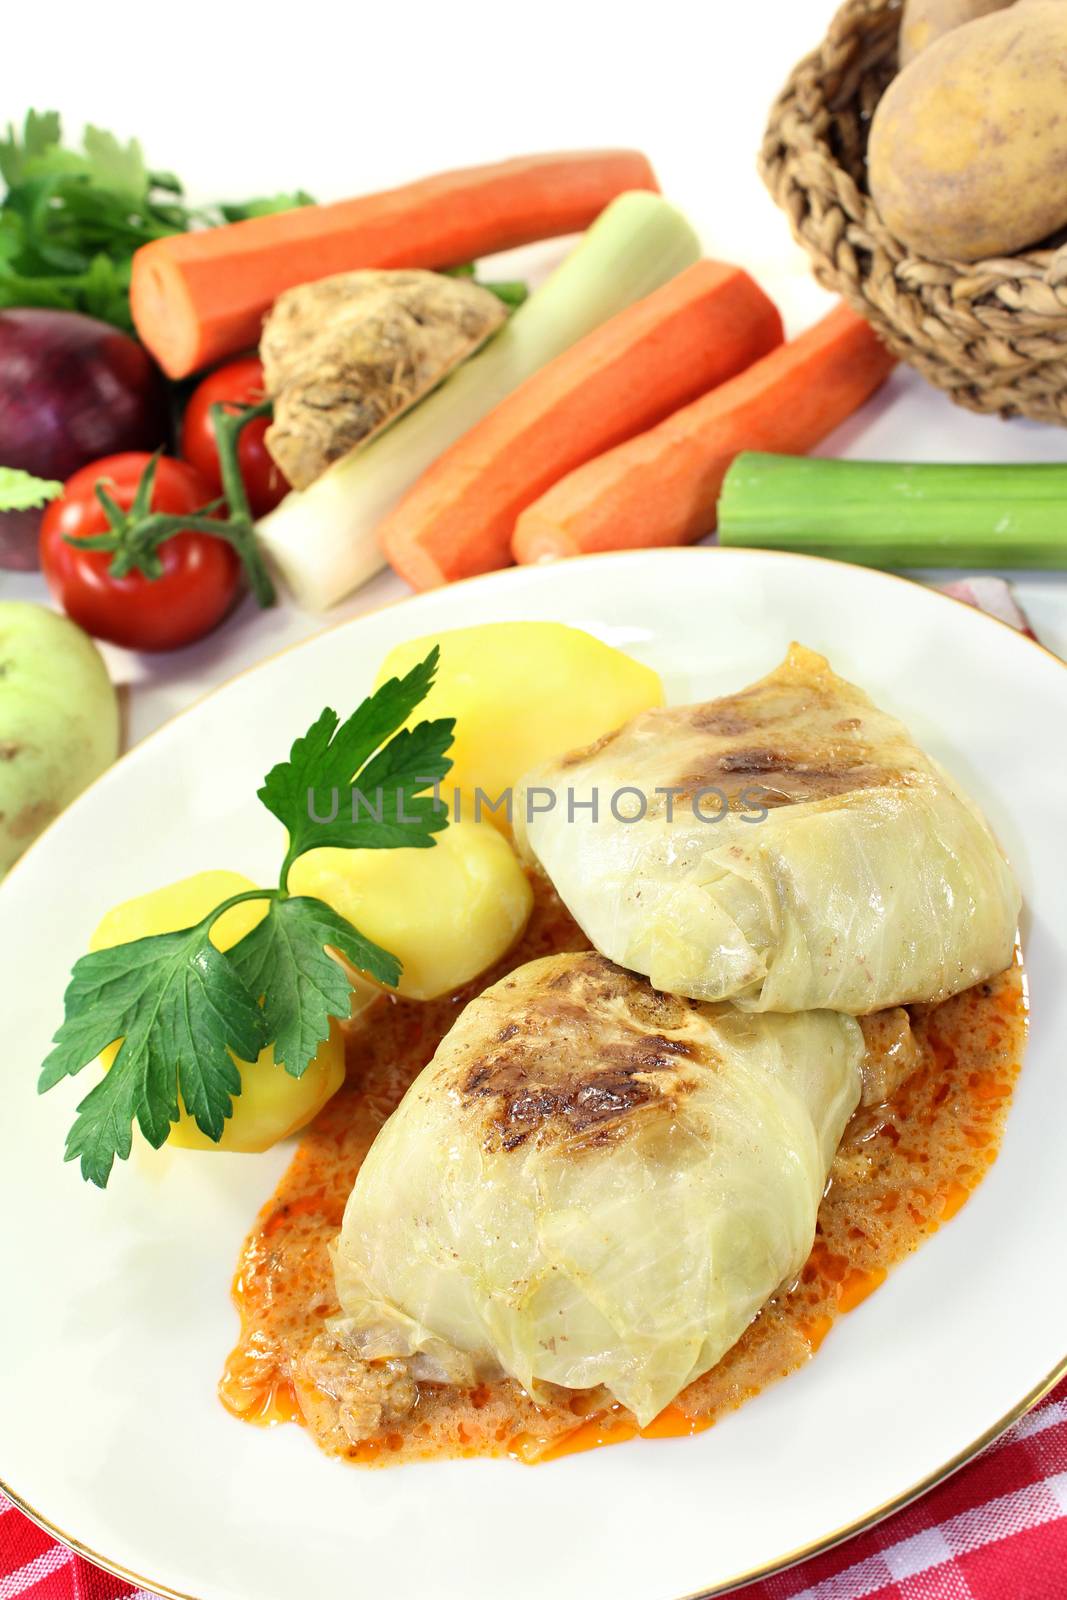 cabbage rolls by silencefoto